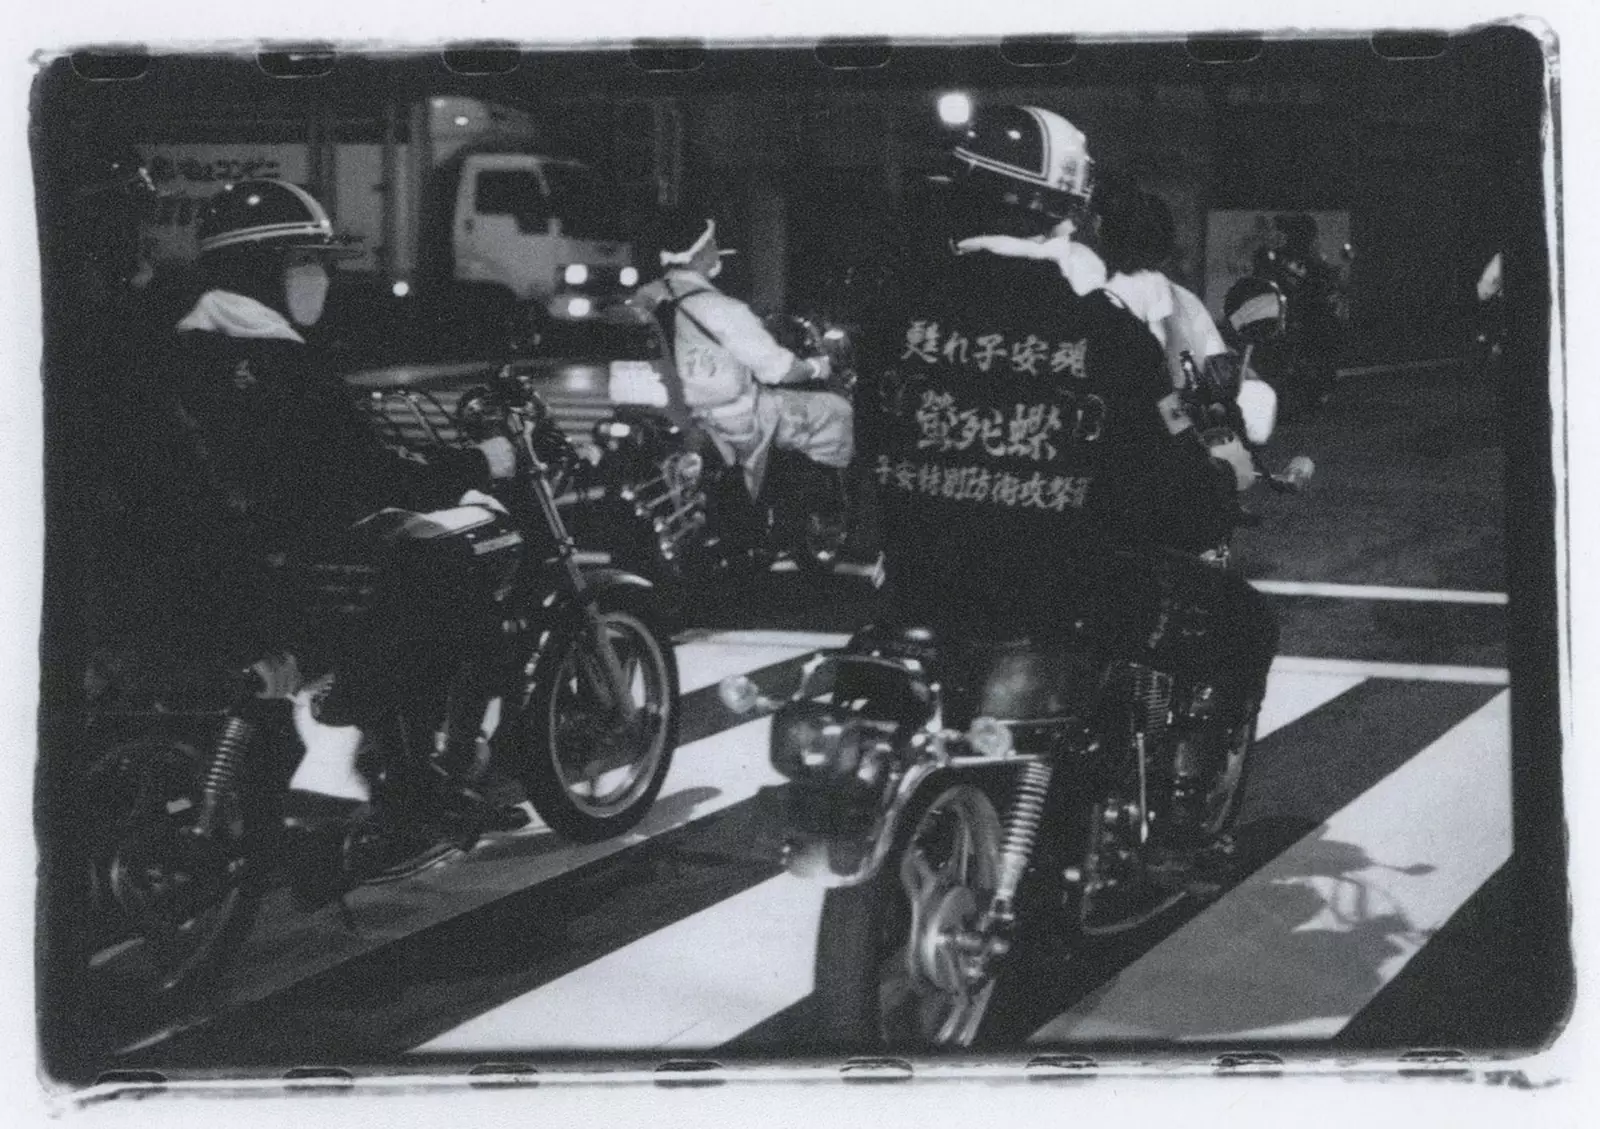 bosozoku-the-stylish-legacy-of-japans-rebel-motorcycle-gangs-10.png